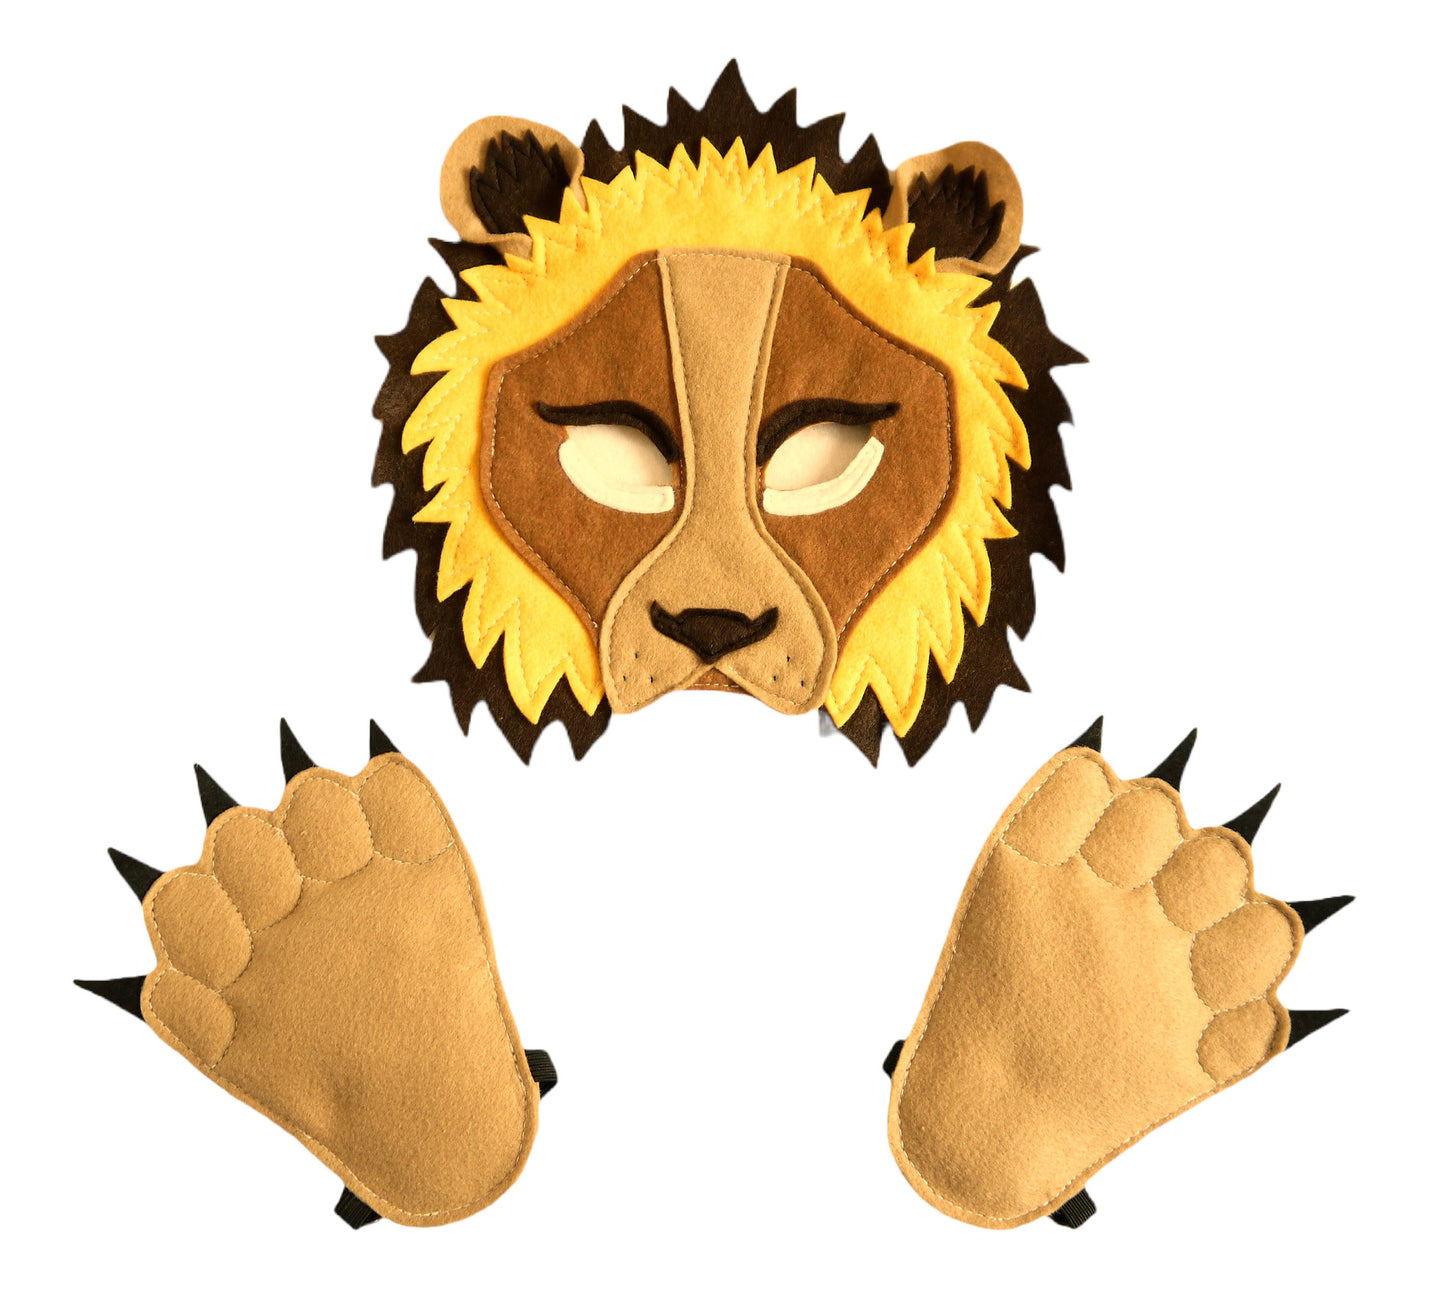 Lion costume onesie, mask and paws